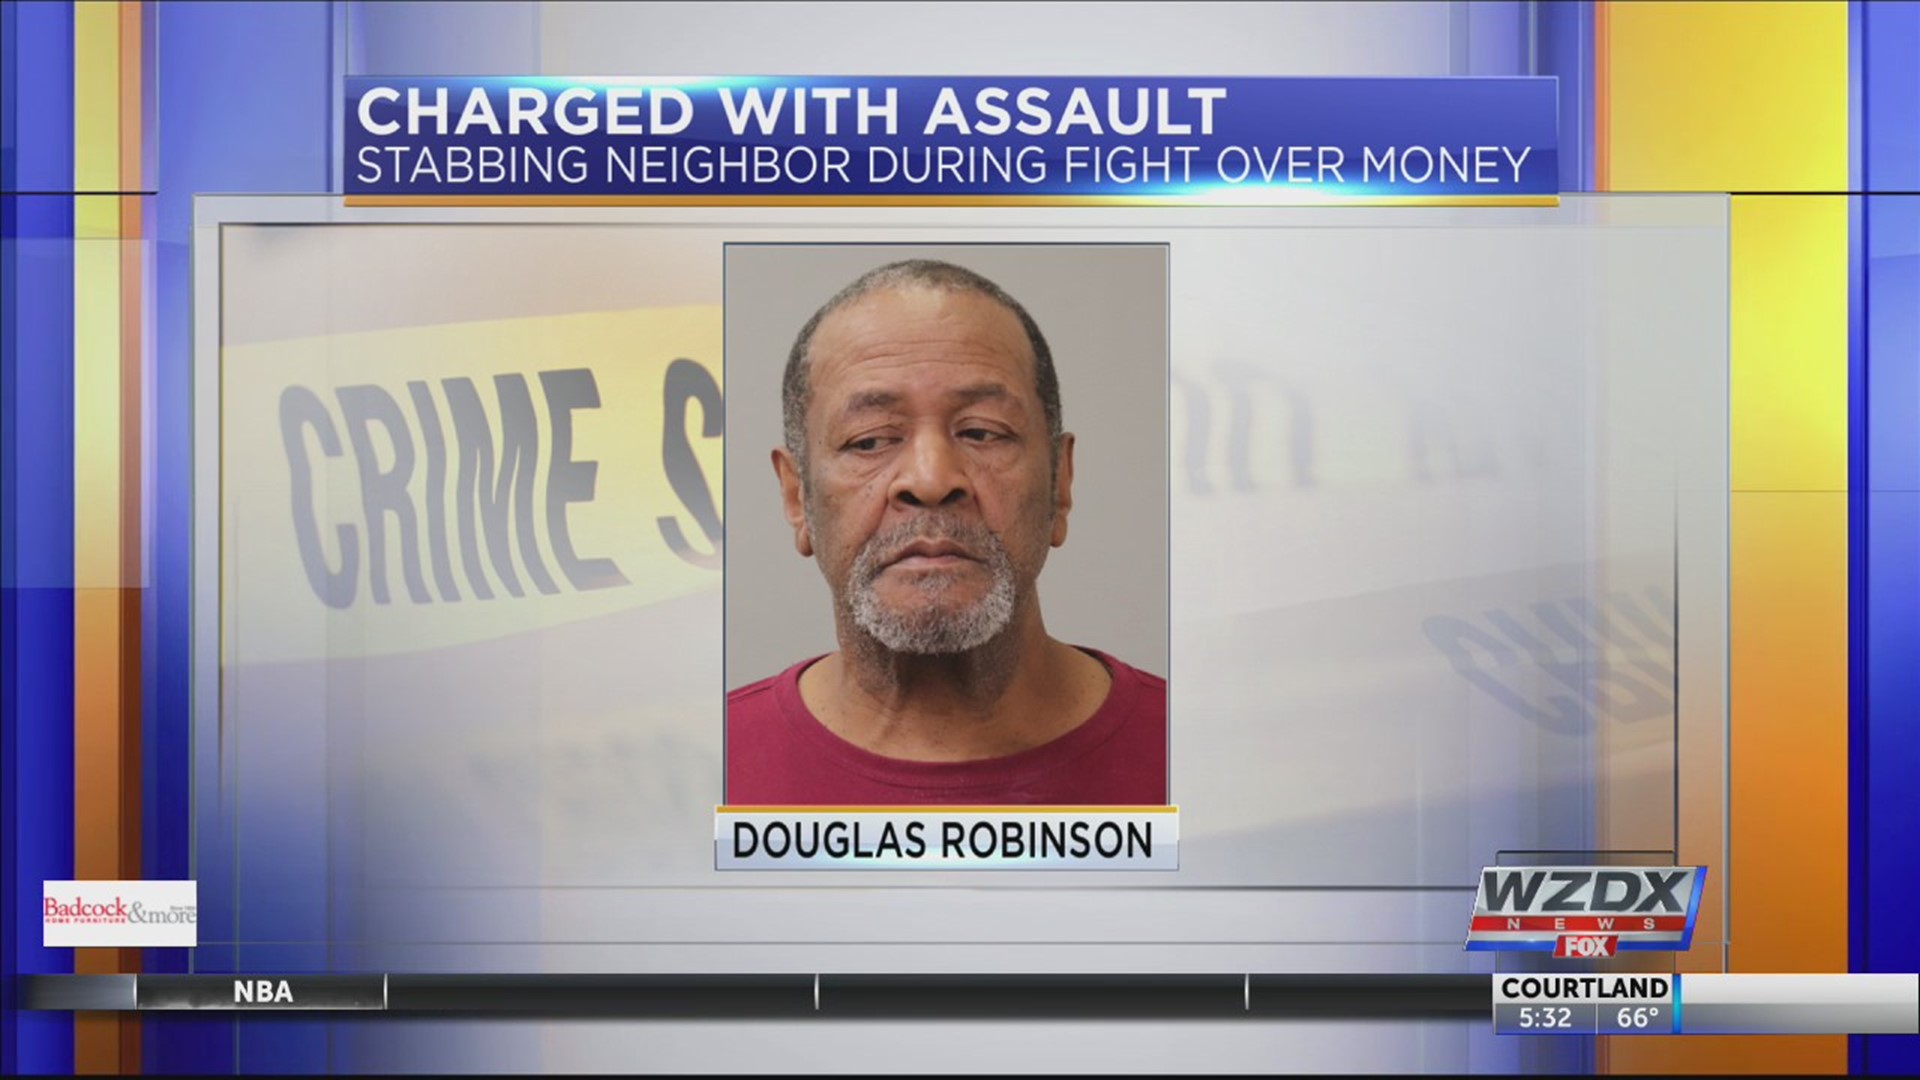 A 66-year-old man is accused of stabbing a neighbor during an argument about money.